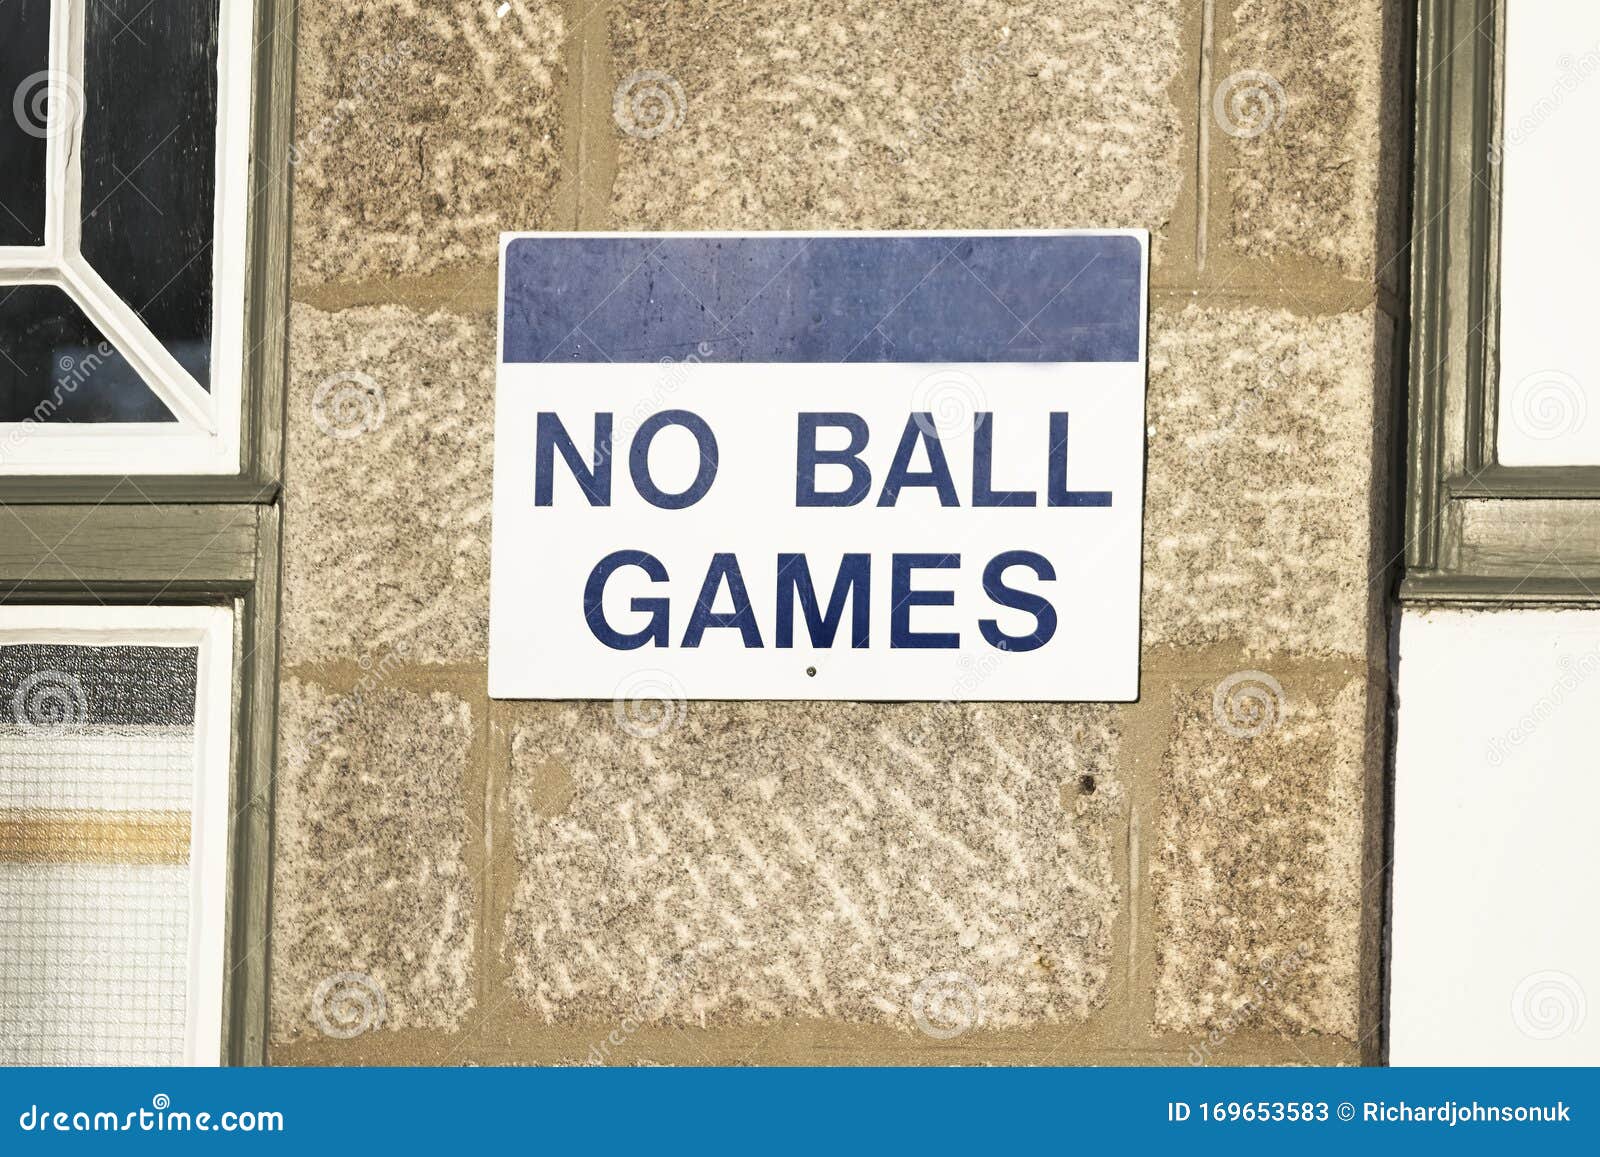 No Ball Games Warning Sign BALL Please Do Not Kick Balls Against The Wall Sign 